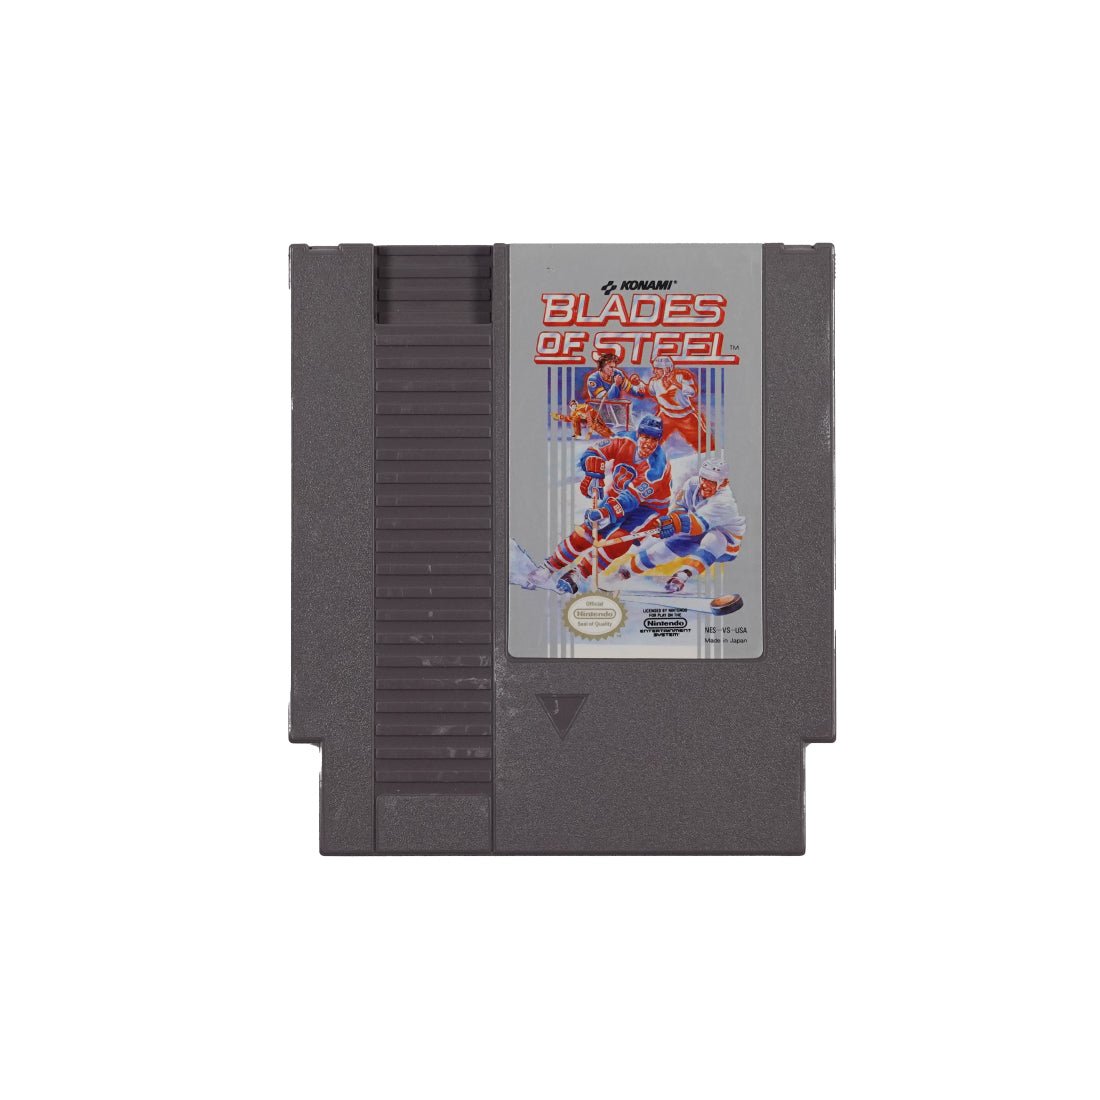 (Pre-Owned) Blades of Steel- Nintendo Entertainment System - Store 974 | ستور ٩٧٤